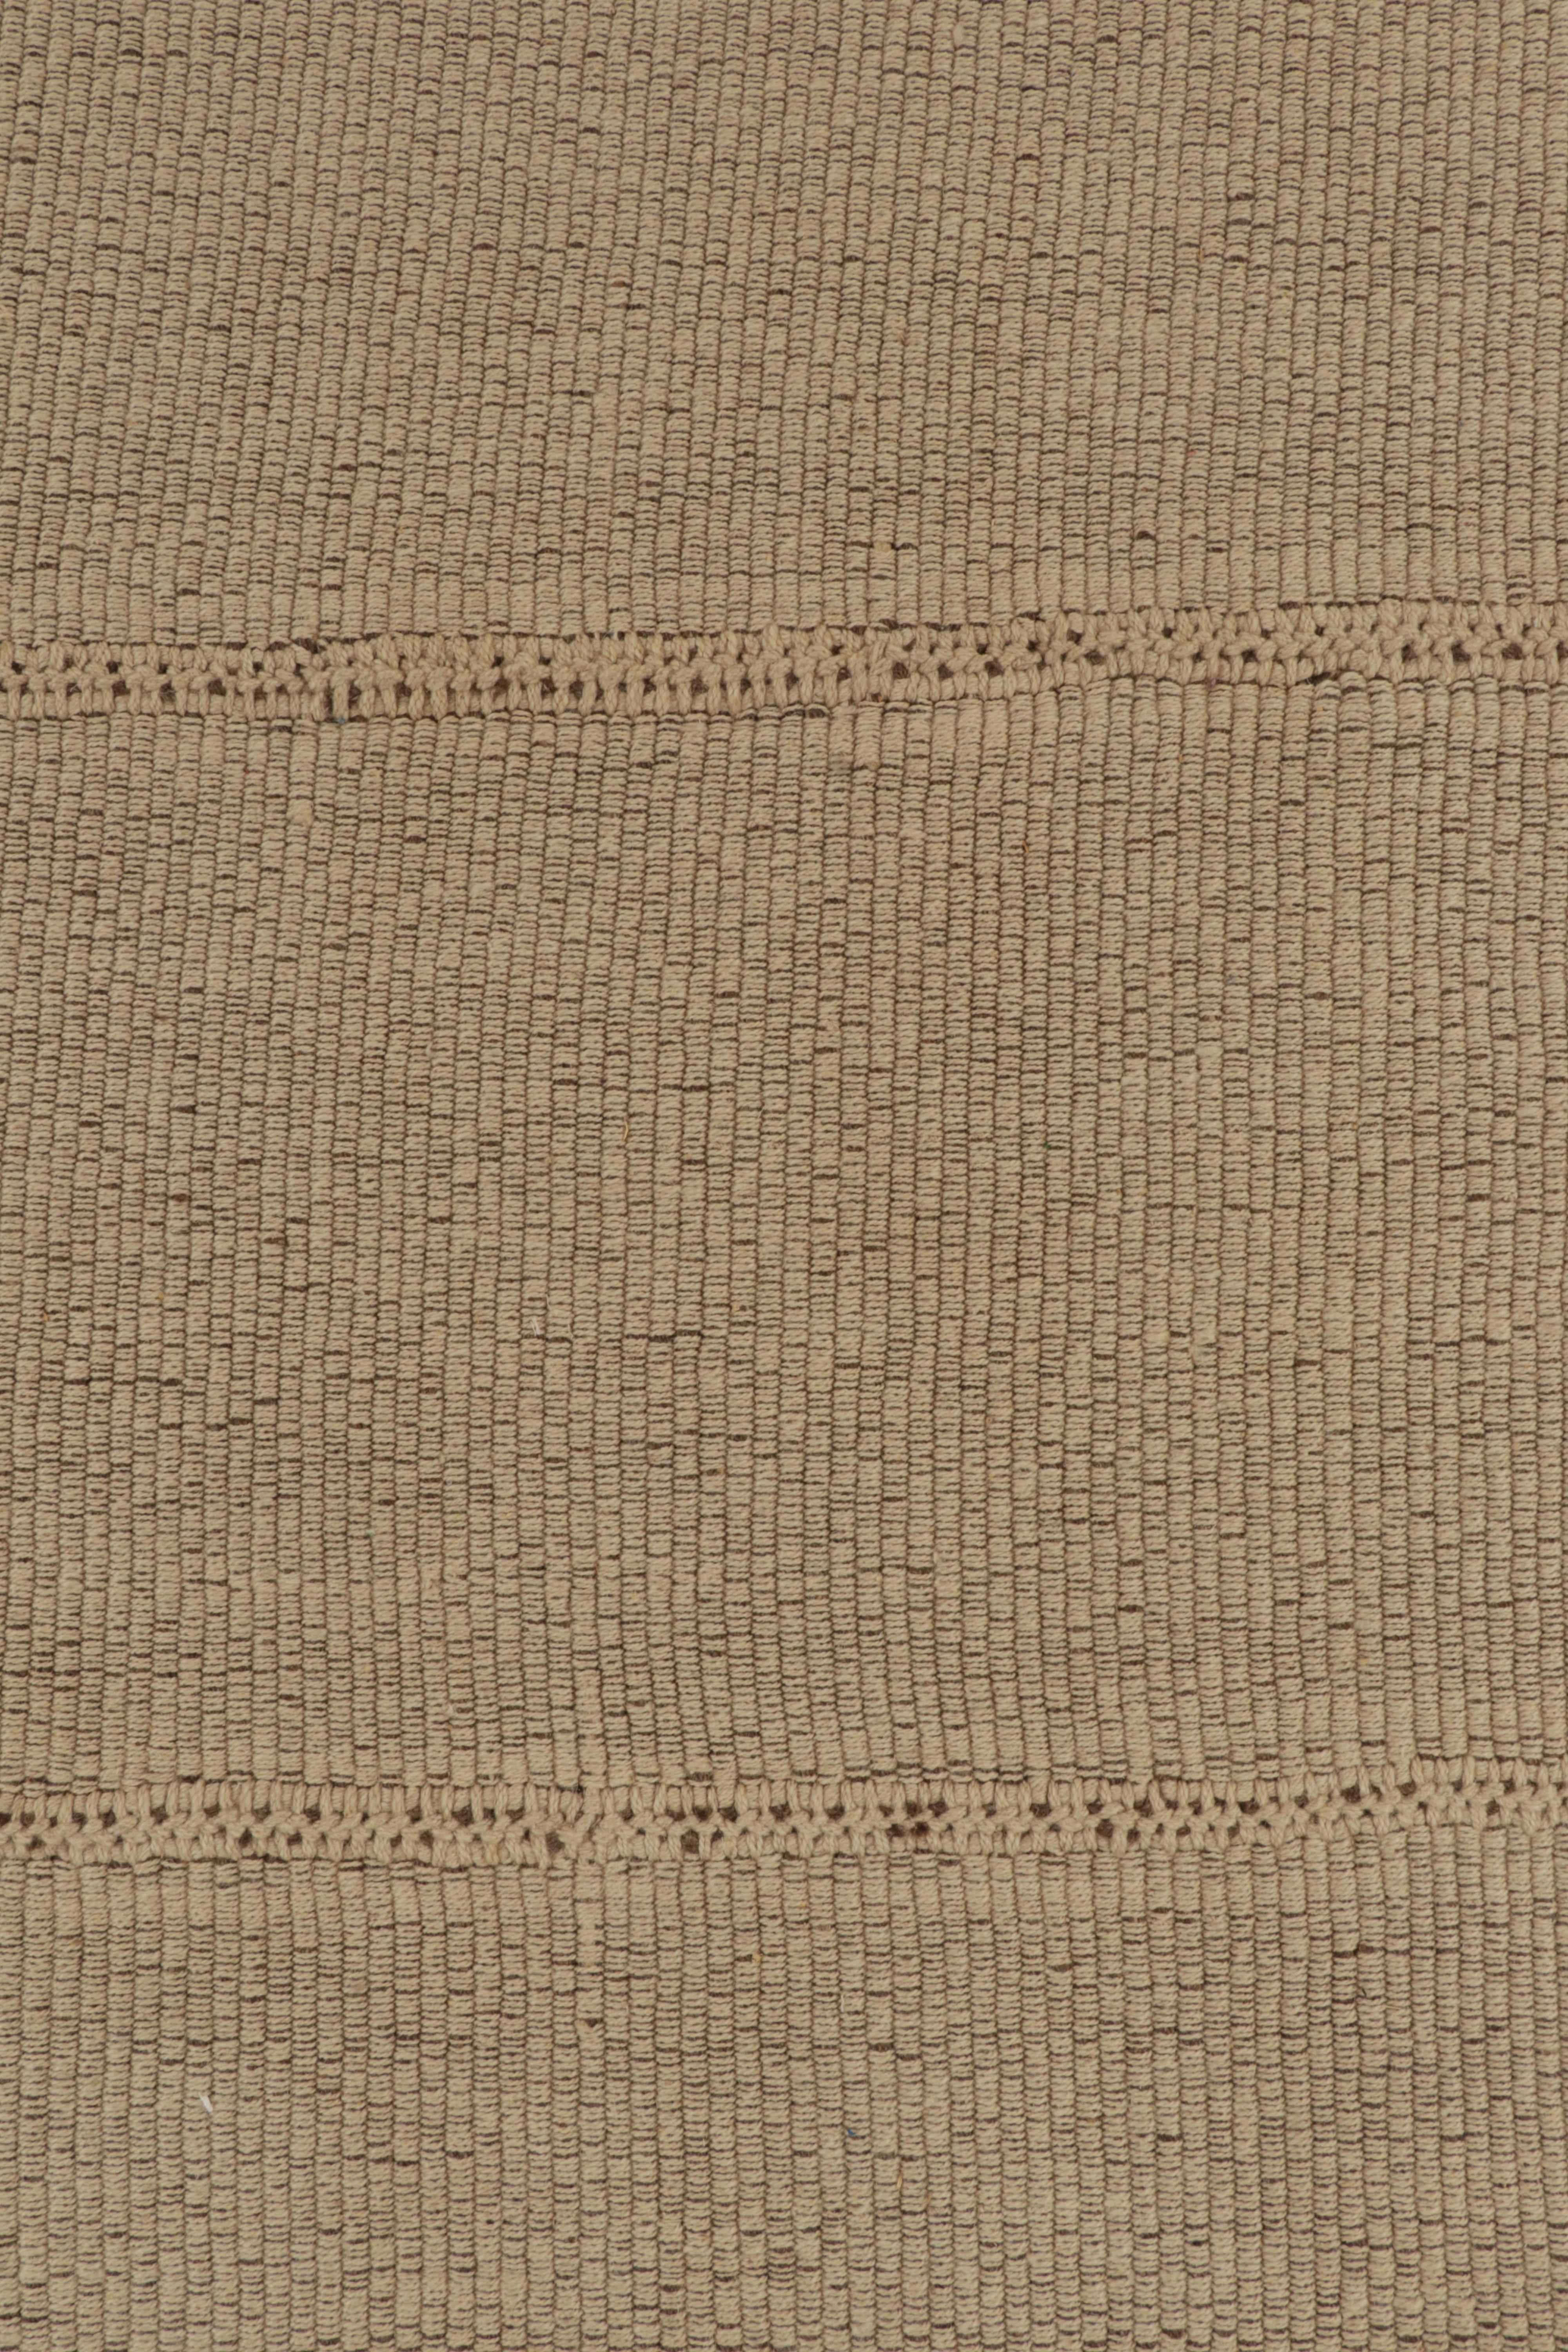 Wool Rug & Kilim’s Contemporary Kilim in Sandy, Solid Beige-Brown Panel Woven style For Sale